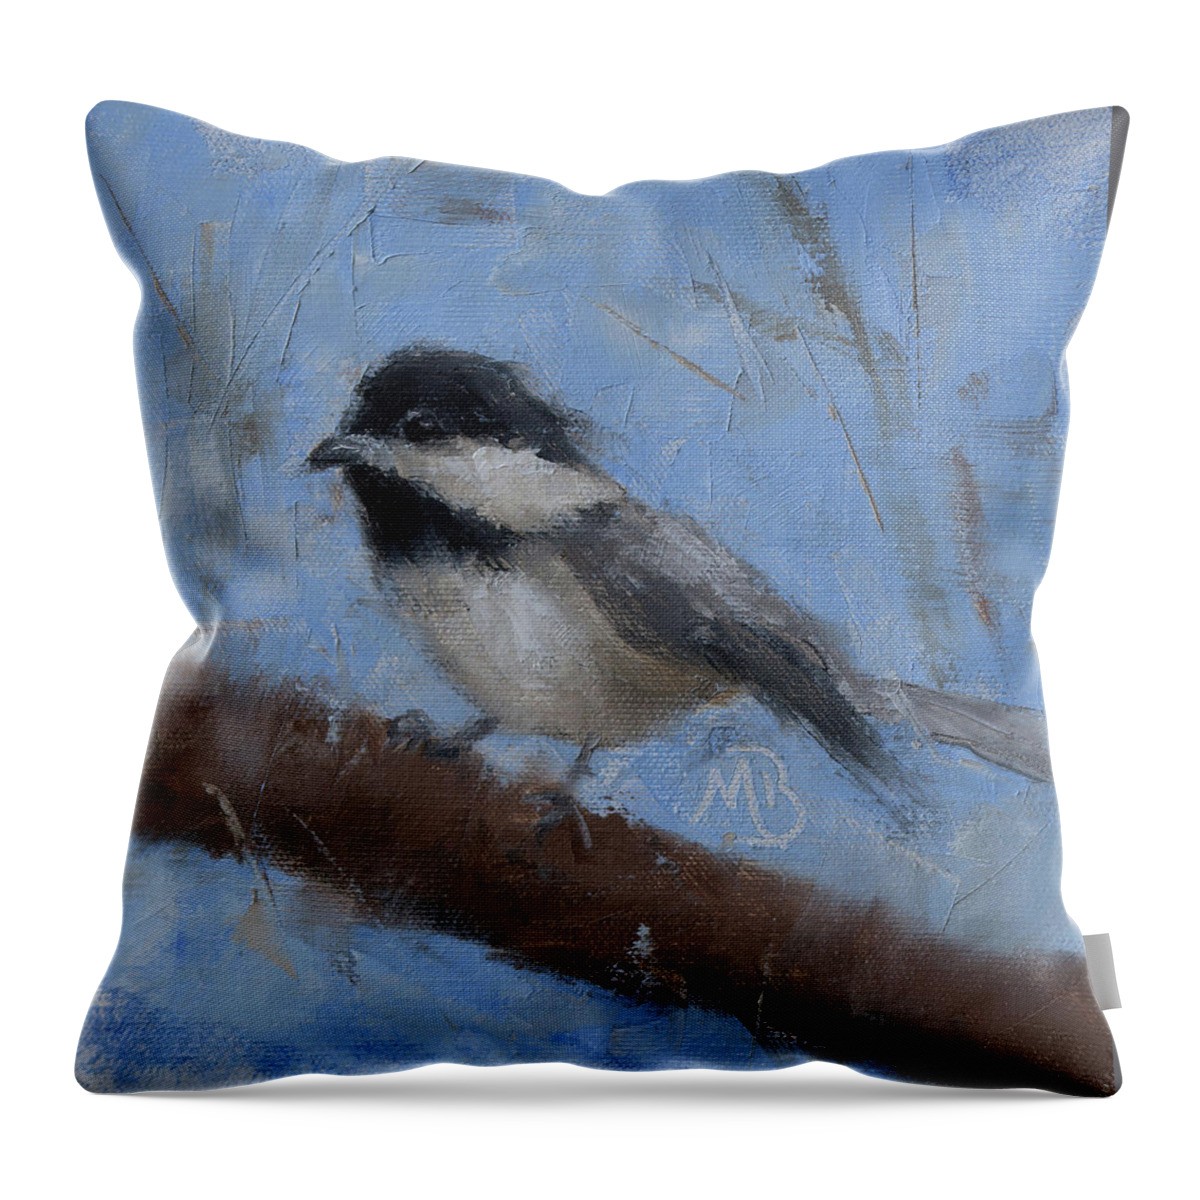 Wildlife Art Throw Pillow featuring the painting Chickadee #1 by Monica Burnette